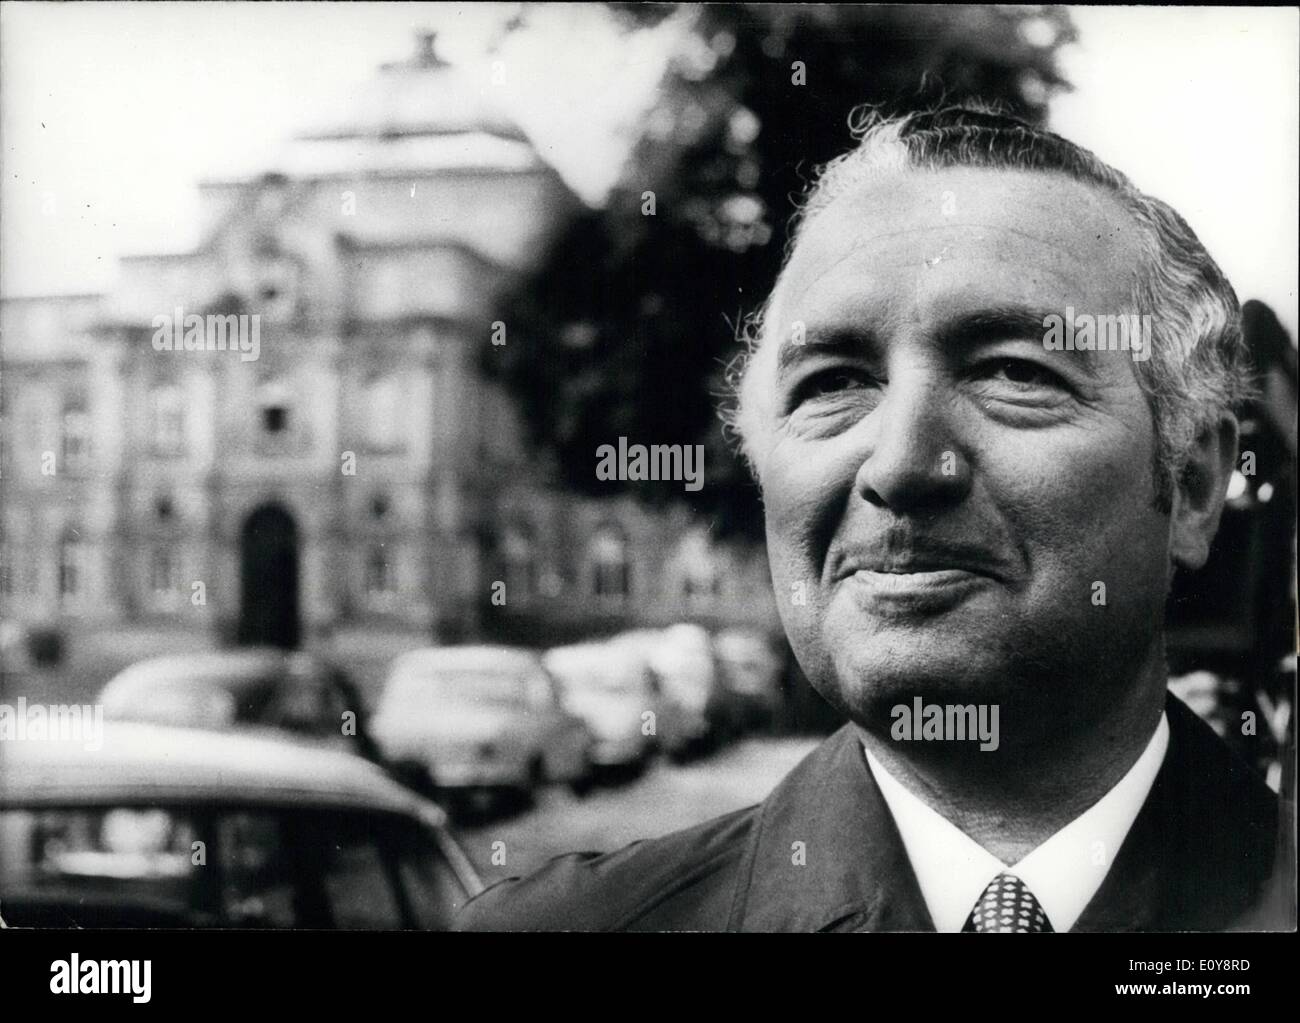 May 05, 1969 - Porst Process in Karlsruhe Beginning, On 12th, May 1969, the trial against the 46-Years-old Nuremberg Trademan Hannsheinz Porest began the Karlsruhe ''Bundesgerichtshof'' Porst, Owner of the World's Biggest Photo Mail-order house, is accused of ''Suspected treacherous relations'' Porst is said to have agreed on revealing work on behalf of the German Democratic Republic's Ministry of State Safety against the Federal Republic of Germany. Furthermore he is said to have worked for the DDR Secret Service Stock Photo